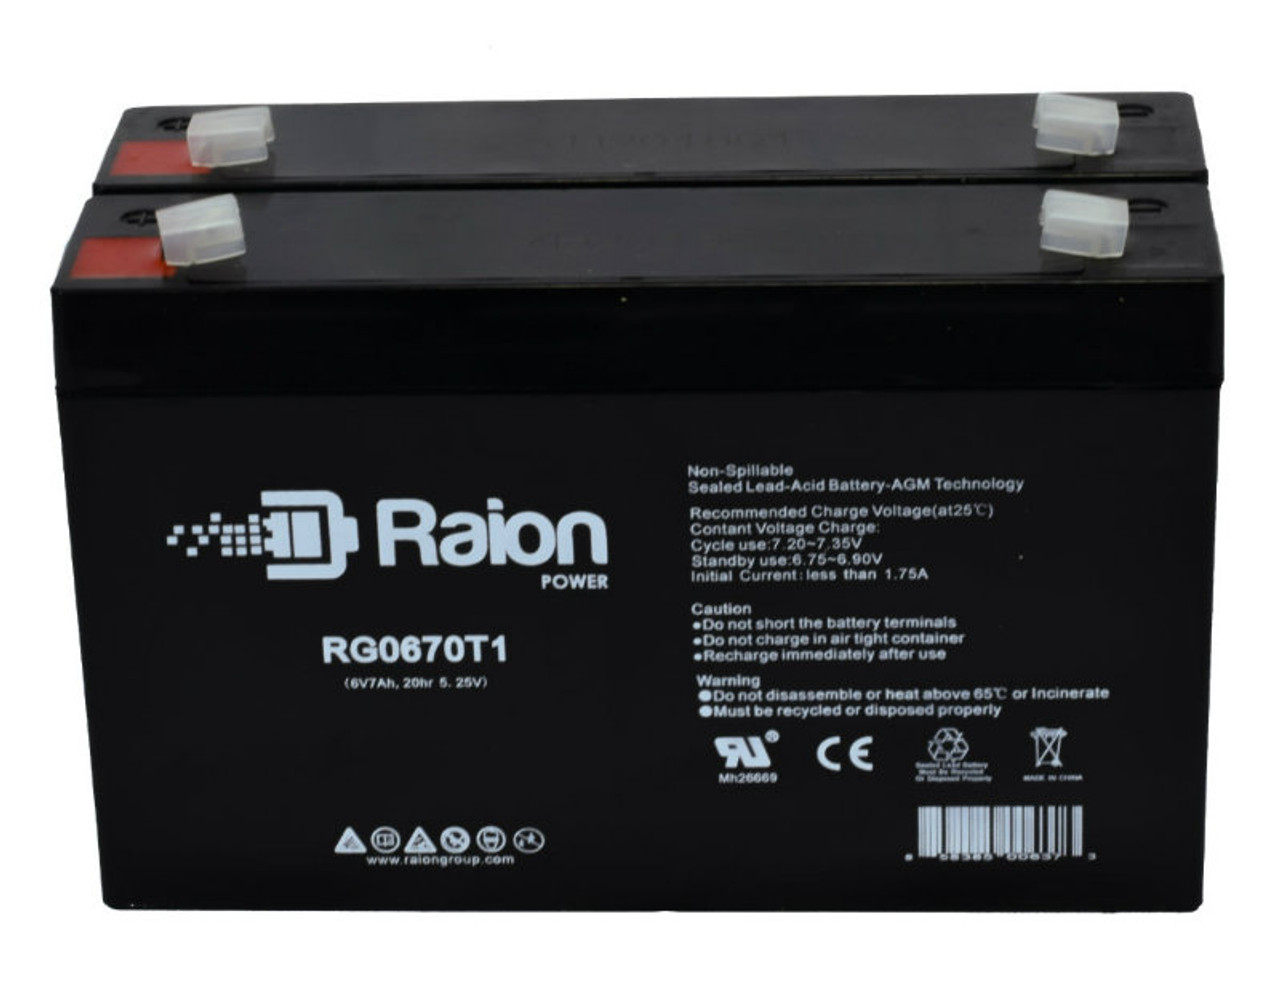 Raion Power RG0670T1 6V 7Ah Replacement Emergency Light Battery for Chloride-Lightguard 100001134 - 2 Pack